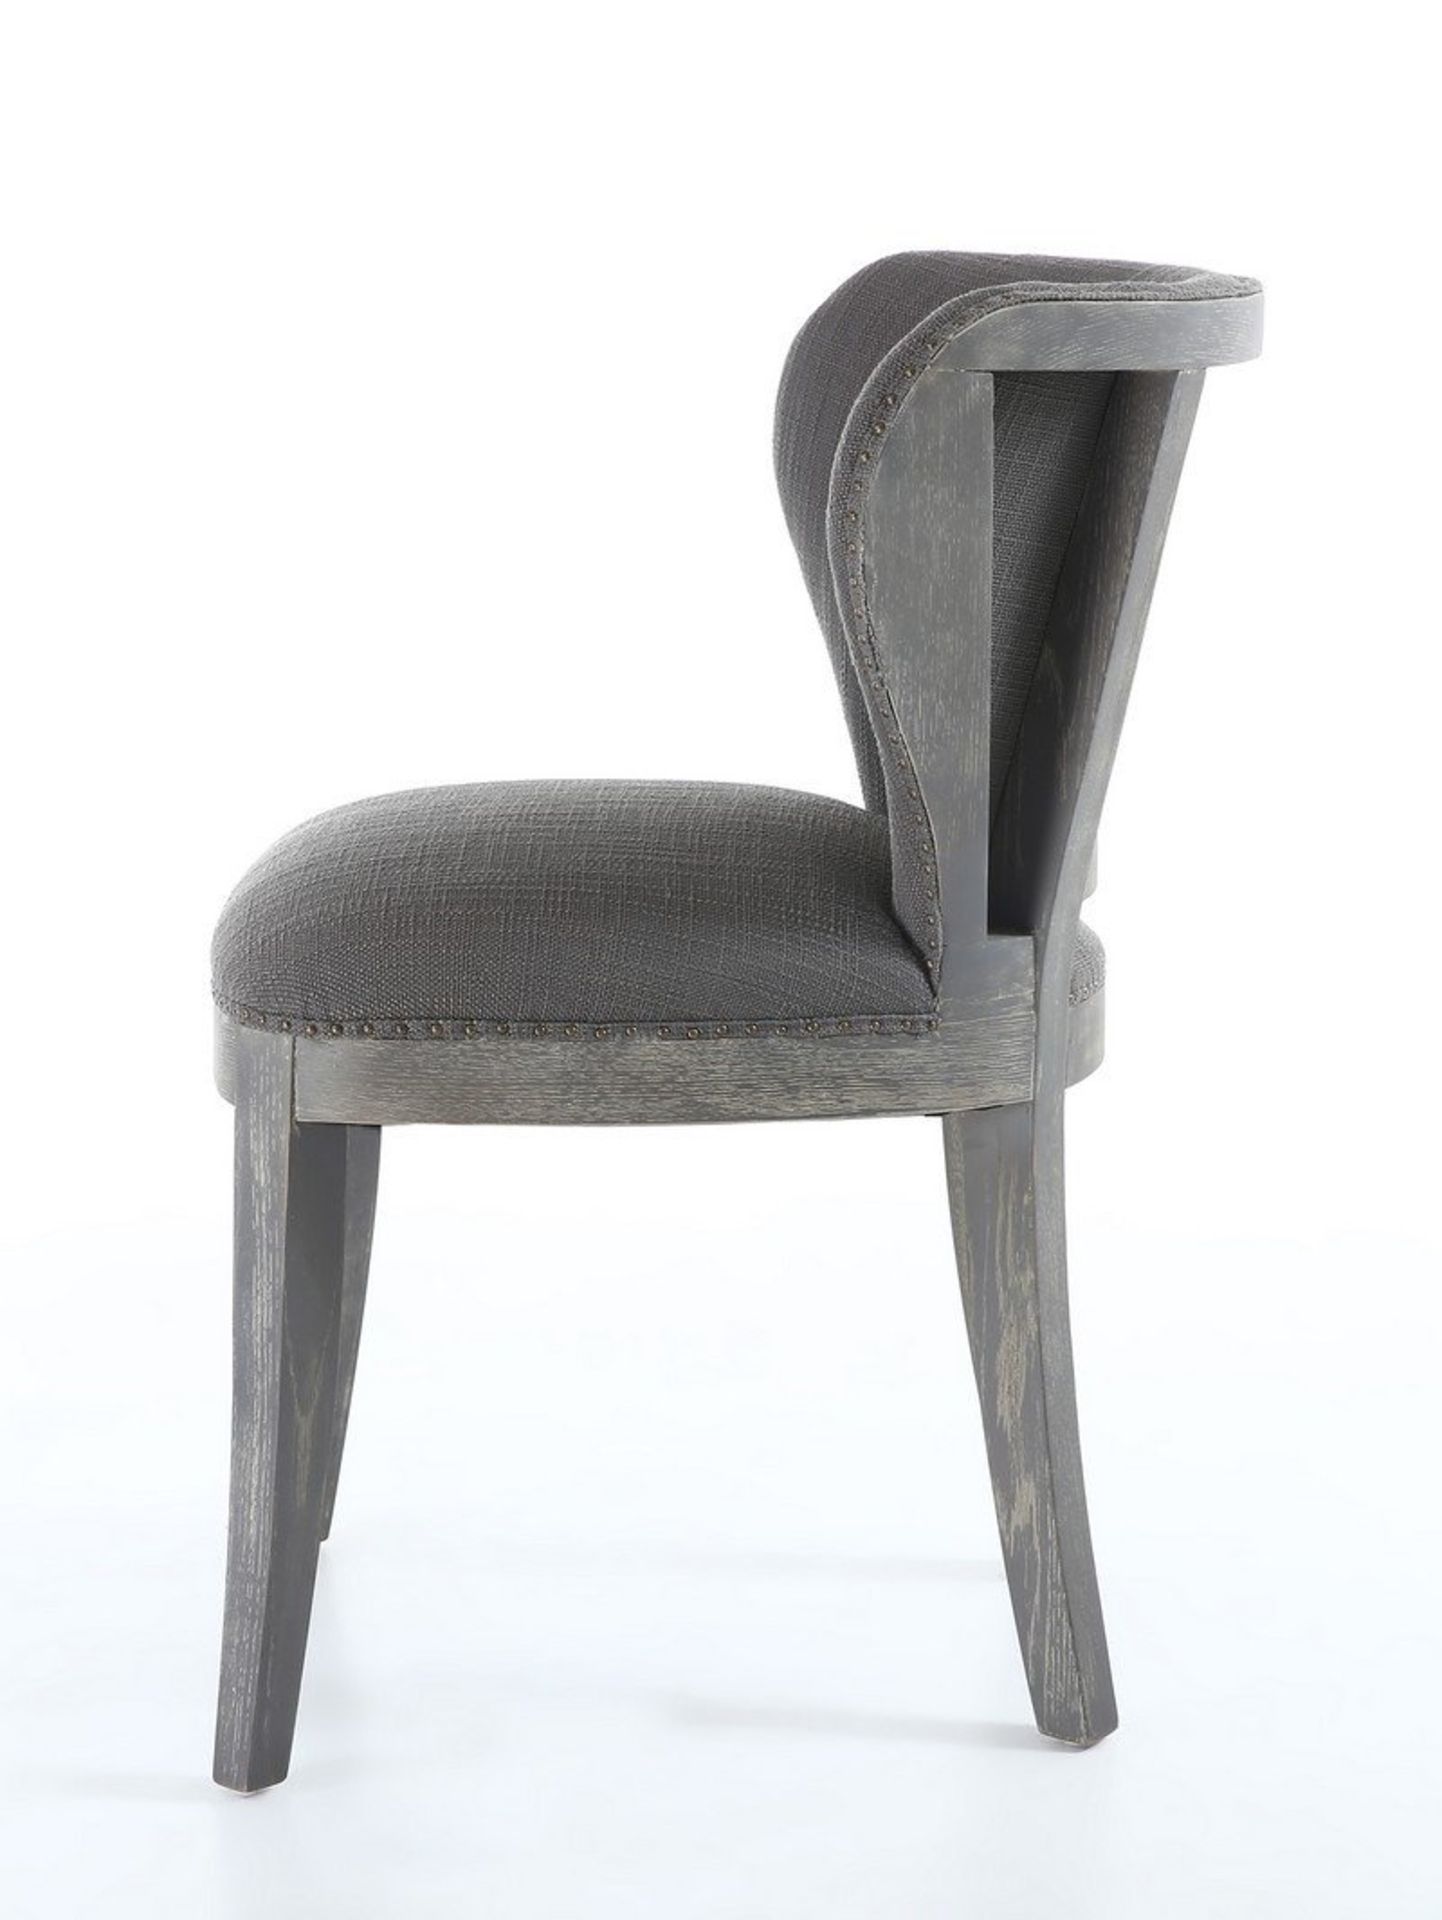 Regal Antique Grey Linen Fabric Wing back Dining chair - Image 3 of 5